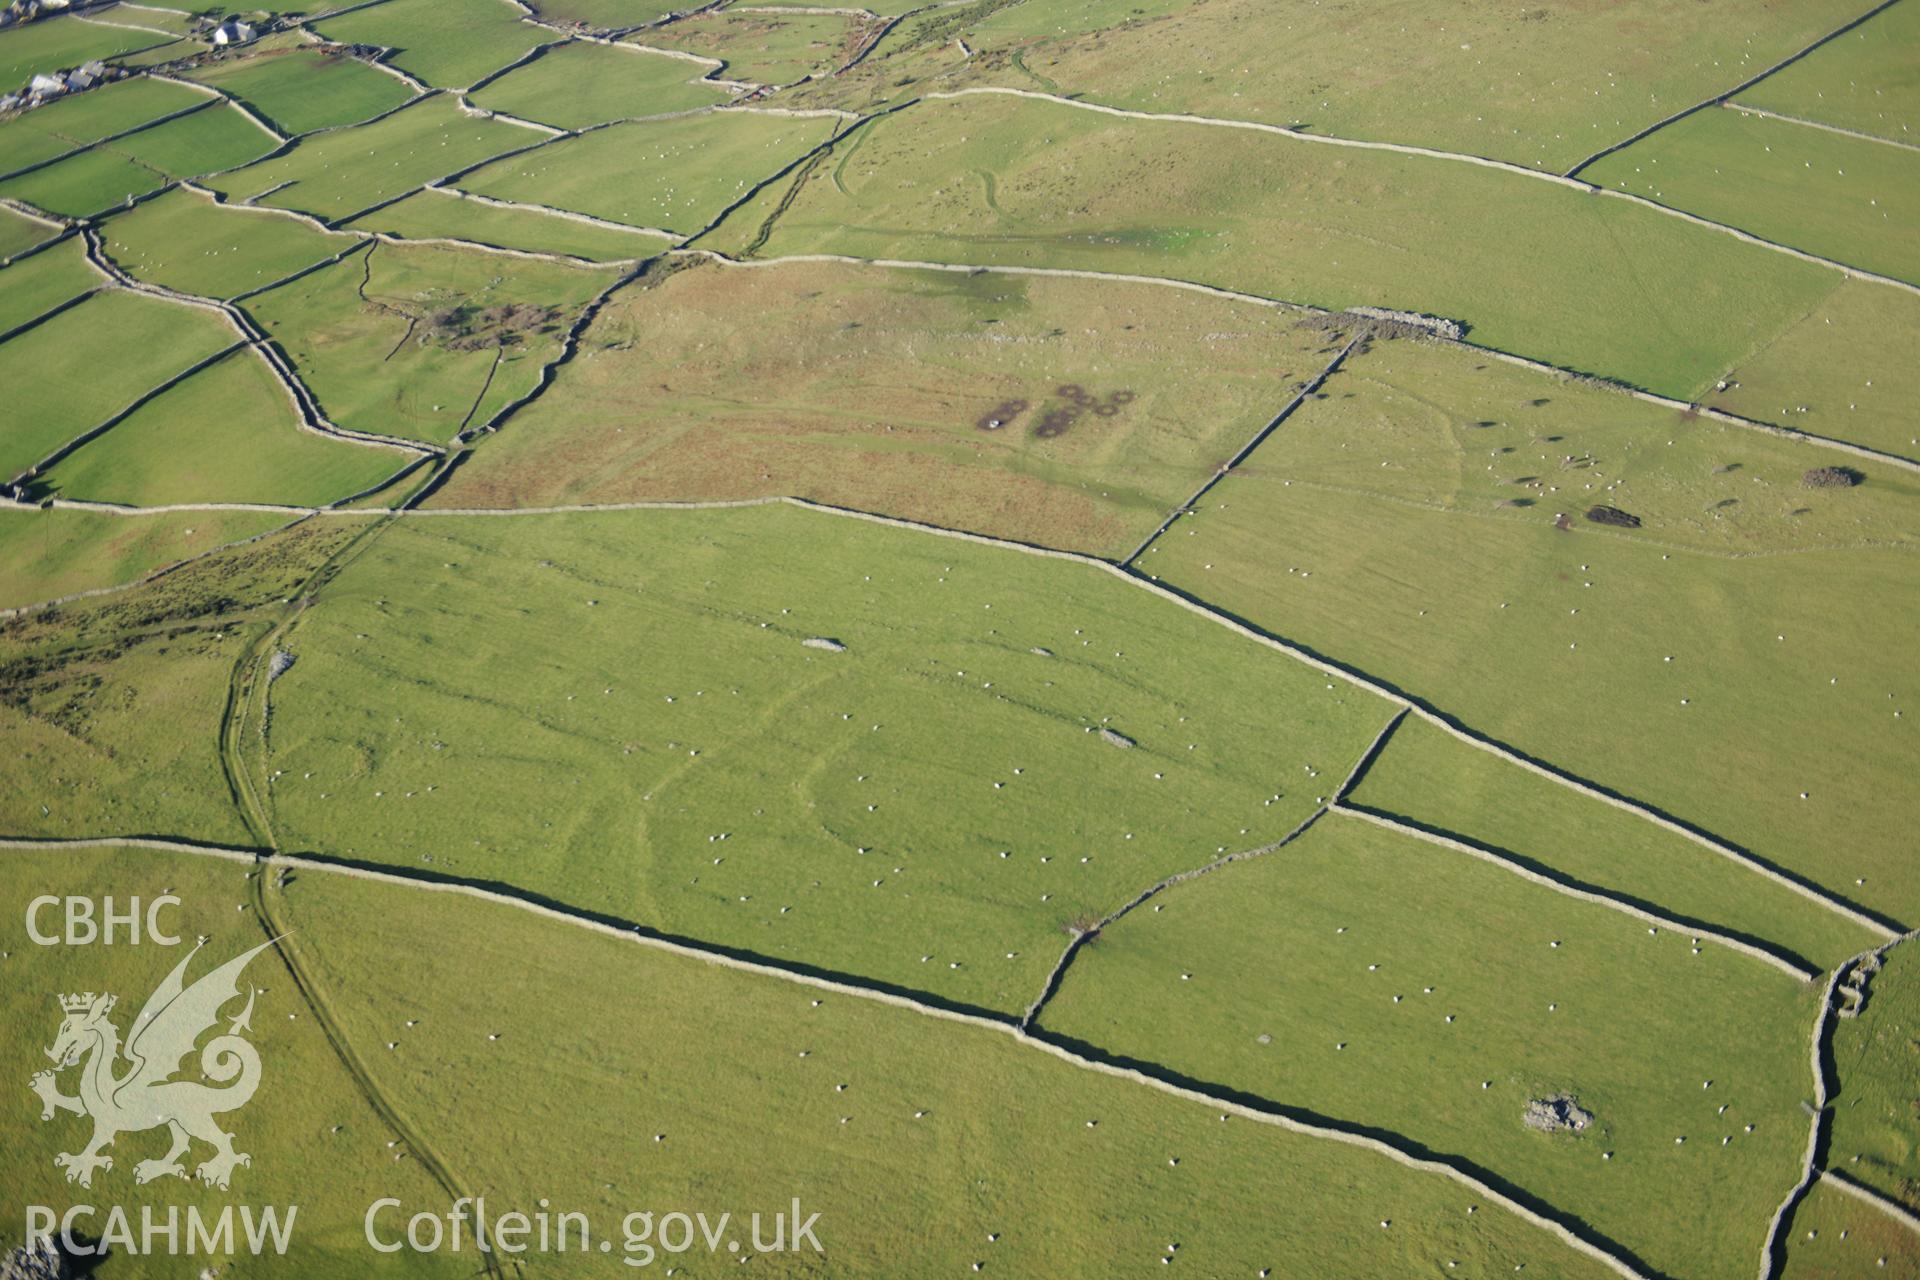 RCAHMW colour oblique photograph of Hendre Coed Uchaf concentric enclosures. Taken by Toby Driver on 10/12/2012.